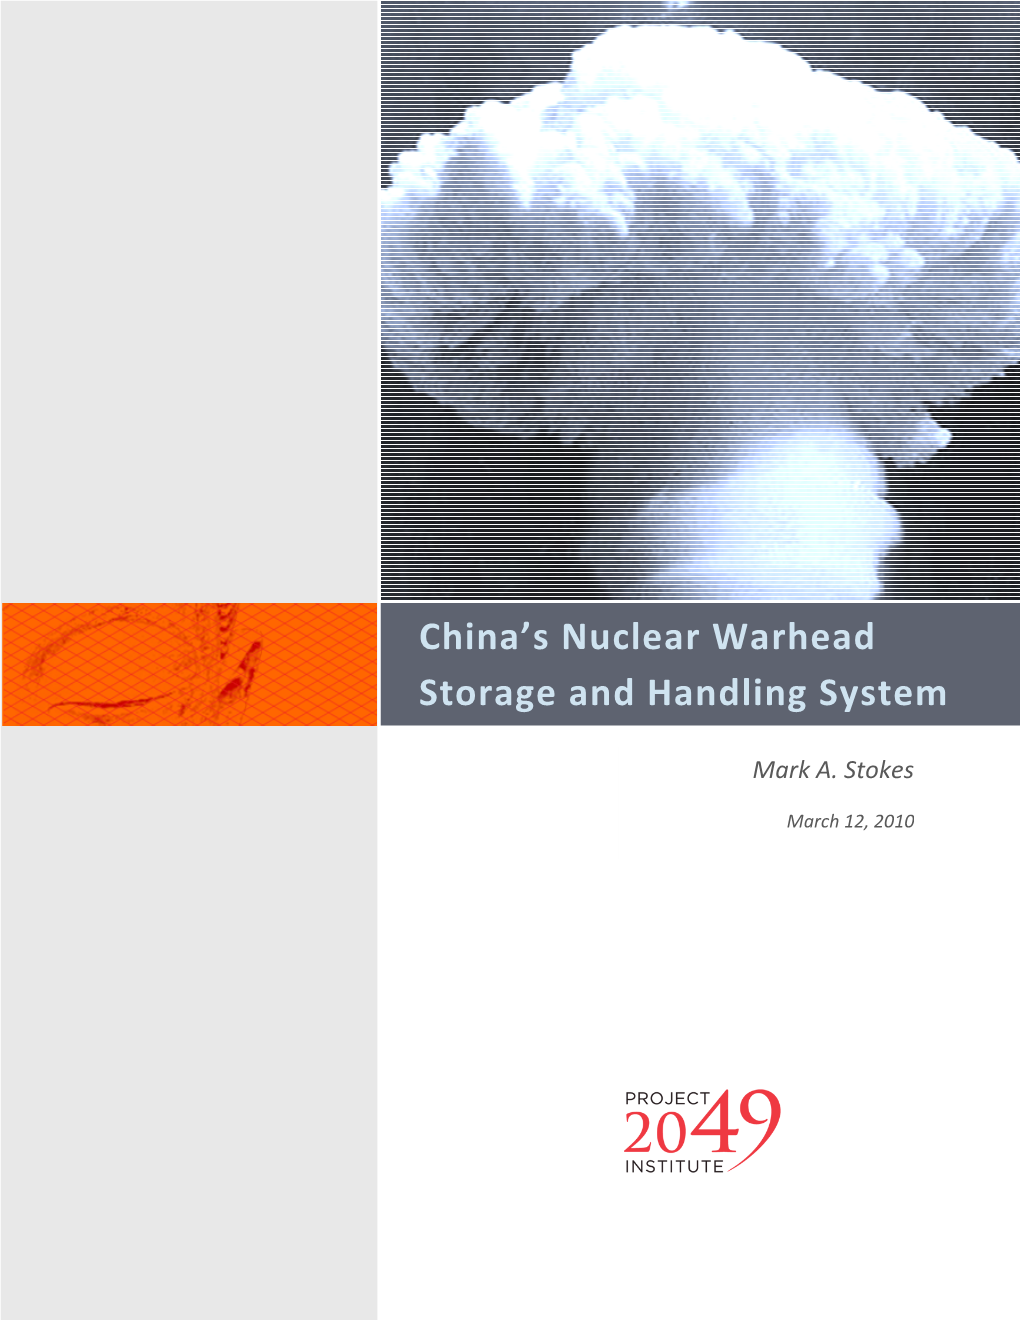 China's Nuclear Warhead Storage and Handling System